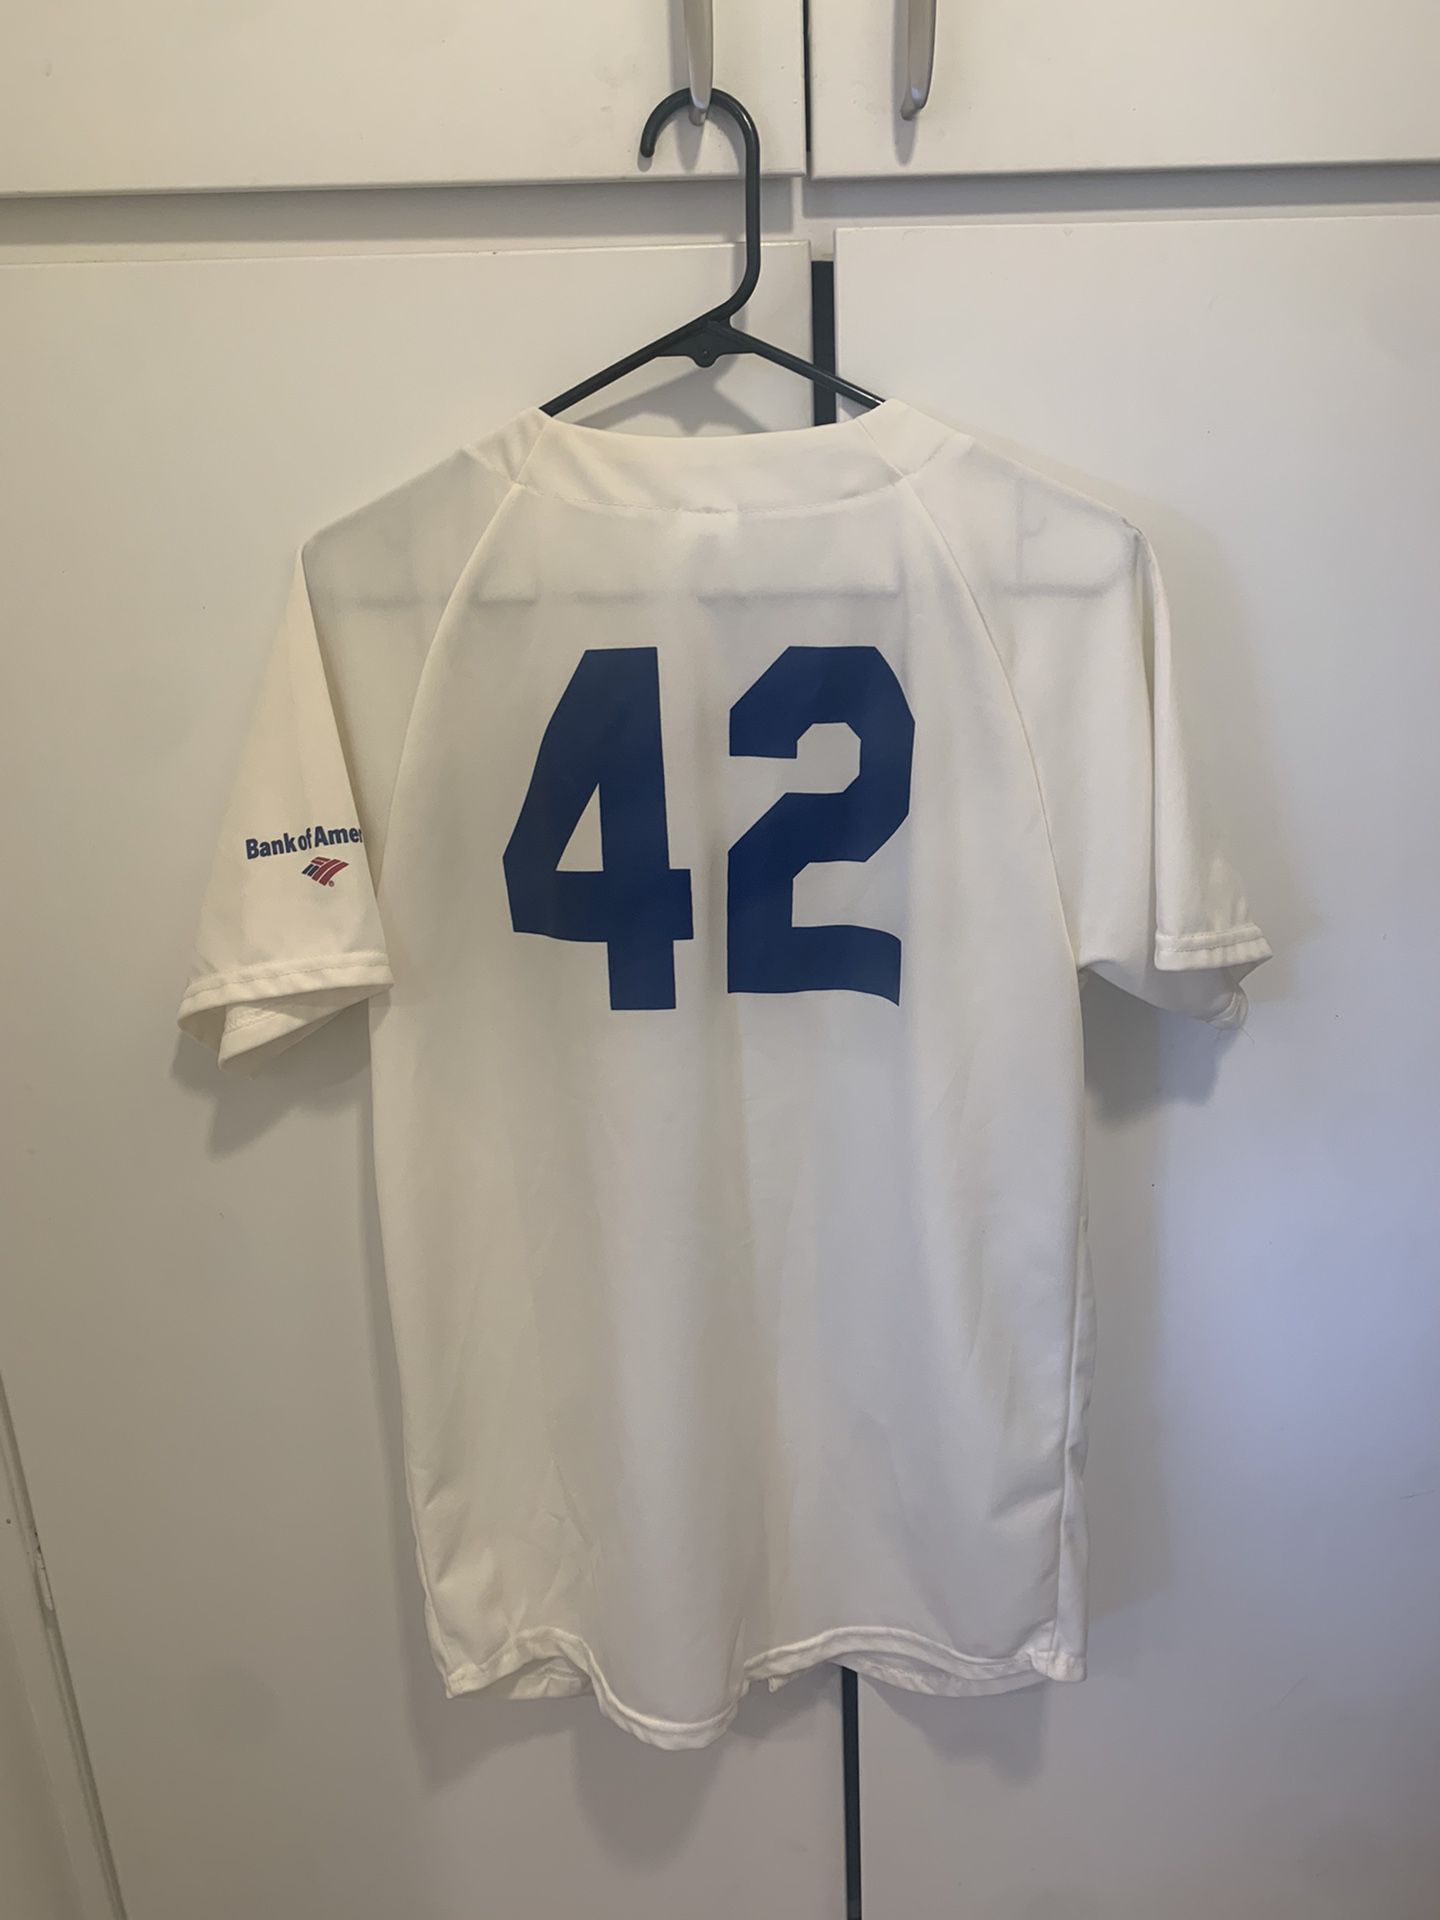 Brooklyn Dodgers Jackie Robinson 42 / Bank of America White Jersey Size MED